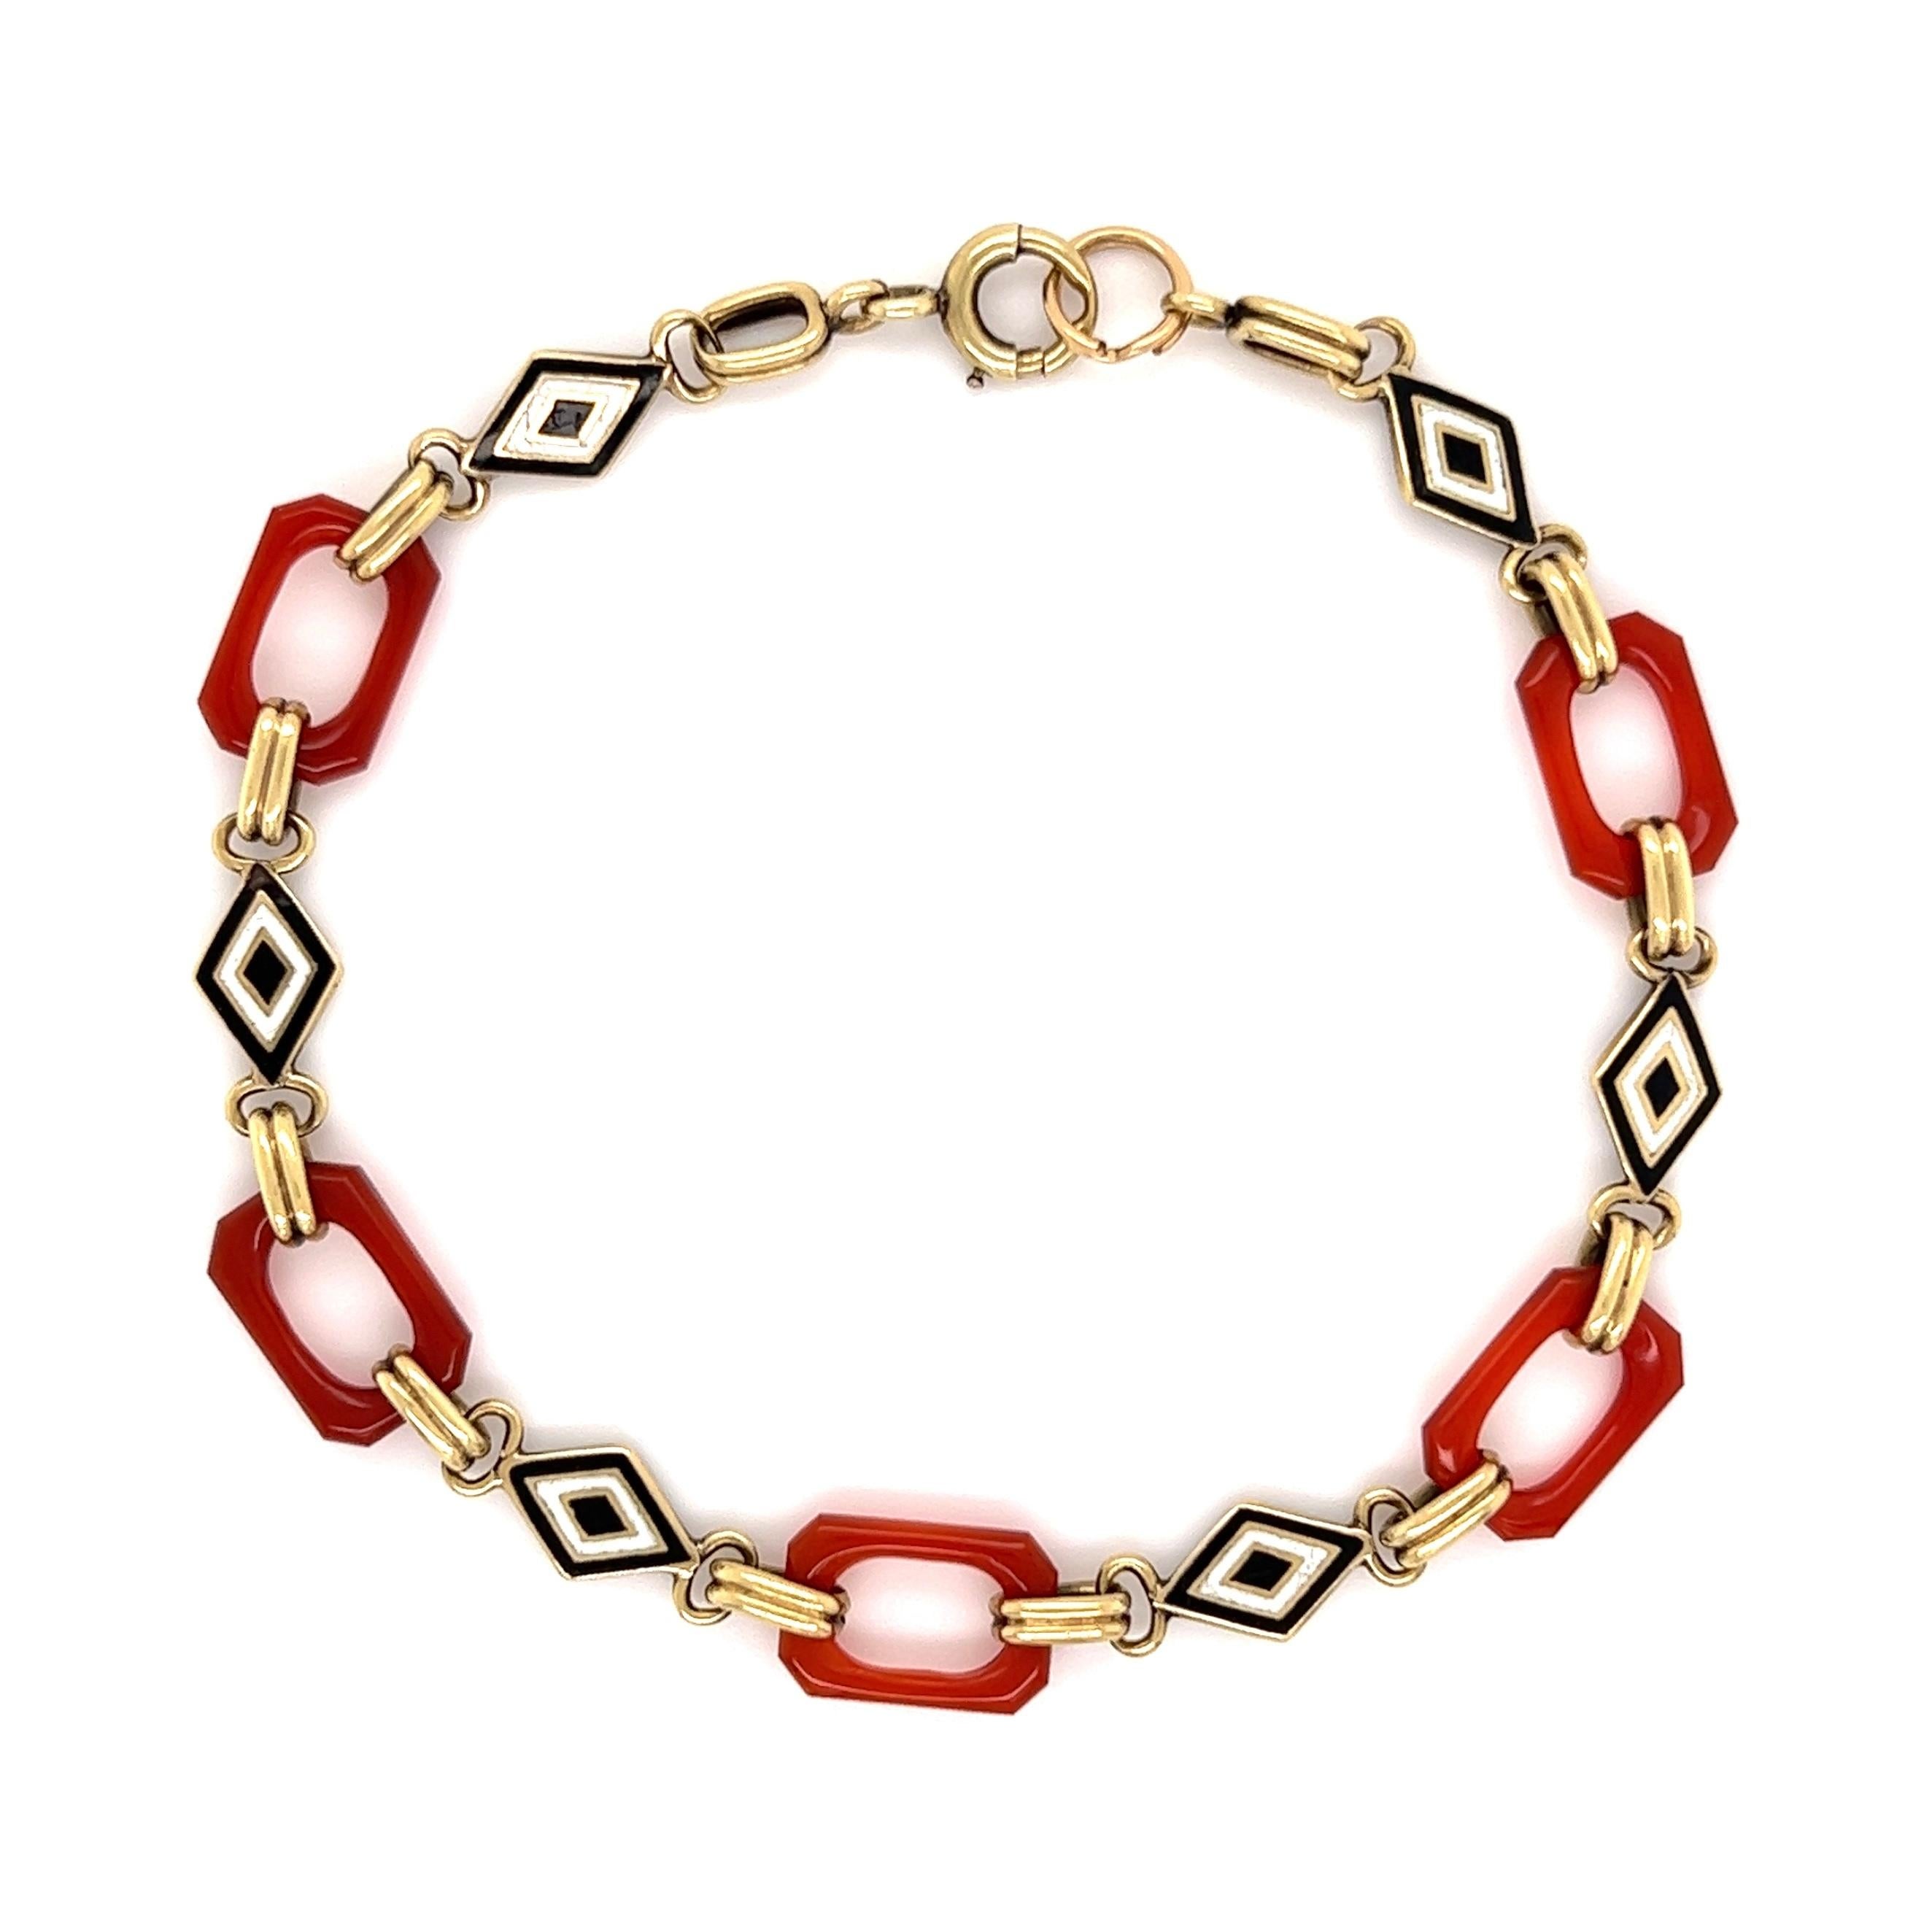 Simply Beautiful! Classic and Chic Carnelian and Enamel Hand crafted 18K Yellow Gold Link Bracelet. Each open link inter-spaced with Carnelian Links and Enamel Medallions. Bracelet measures approx. 7.5” long. A sure to be admired perfect complement